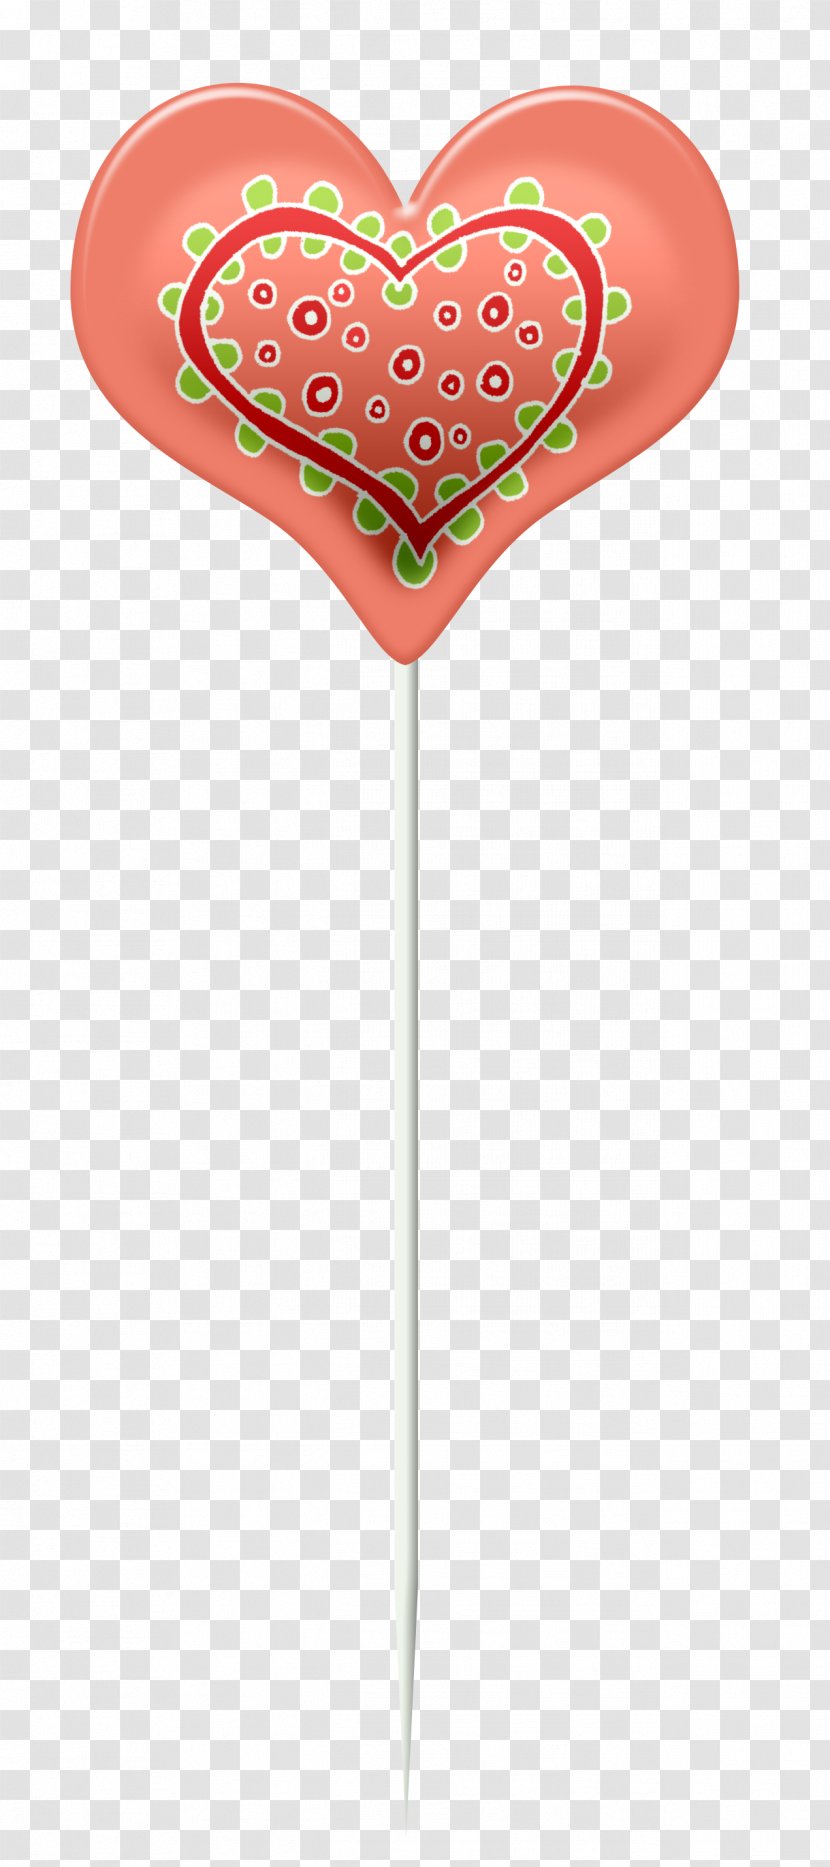 Heart Painting Paper Drawing Clip Art Transparent PNG